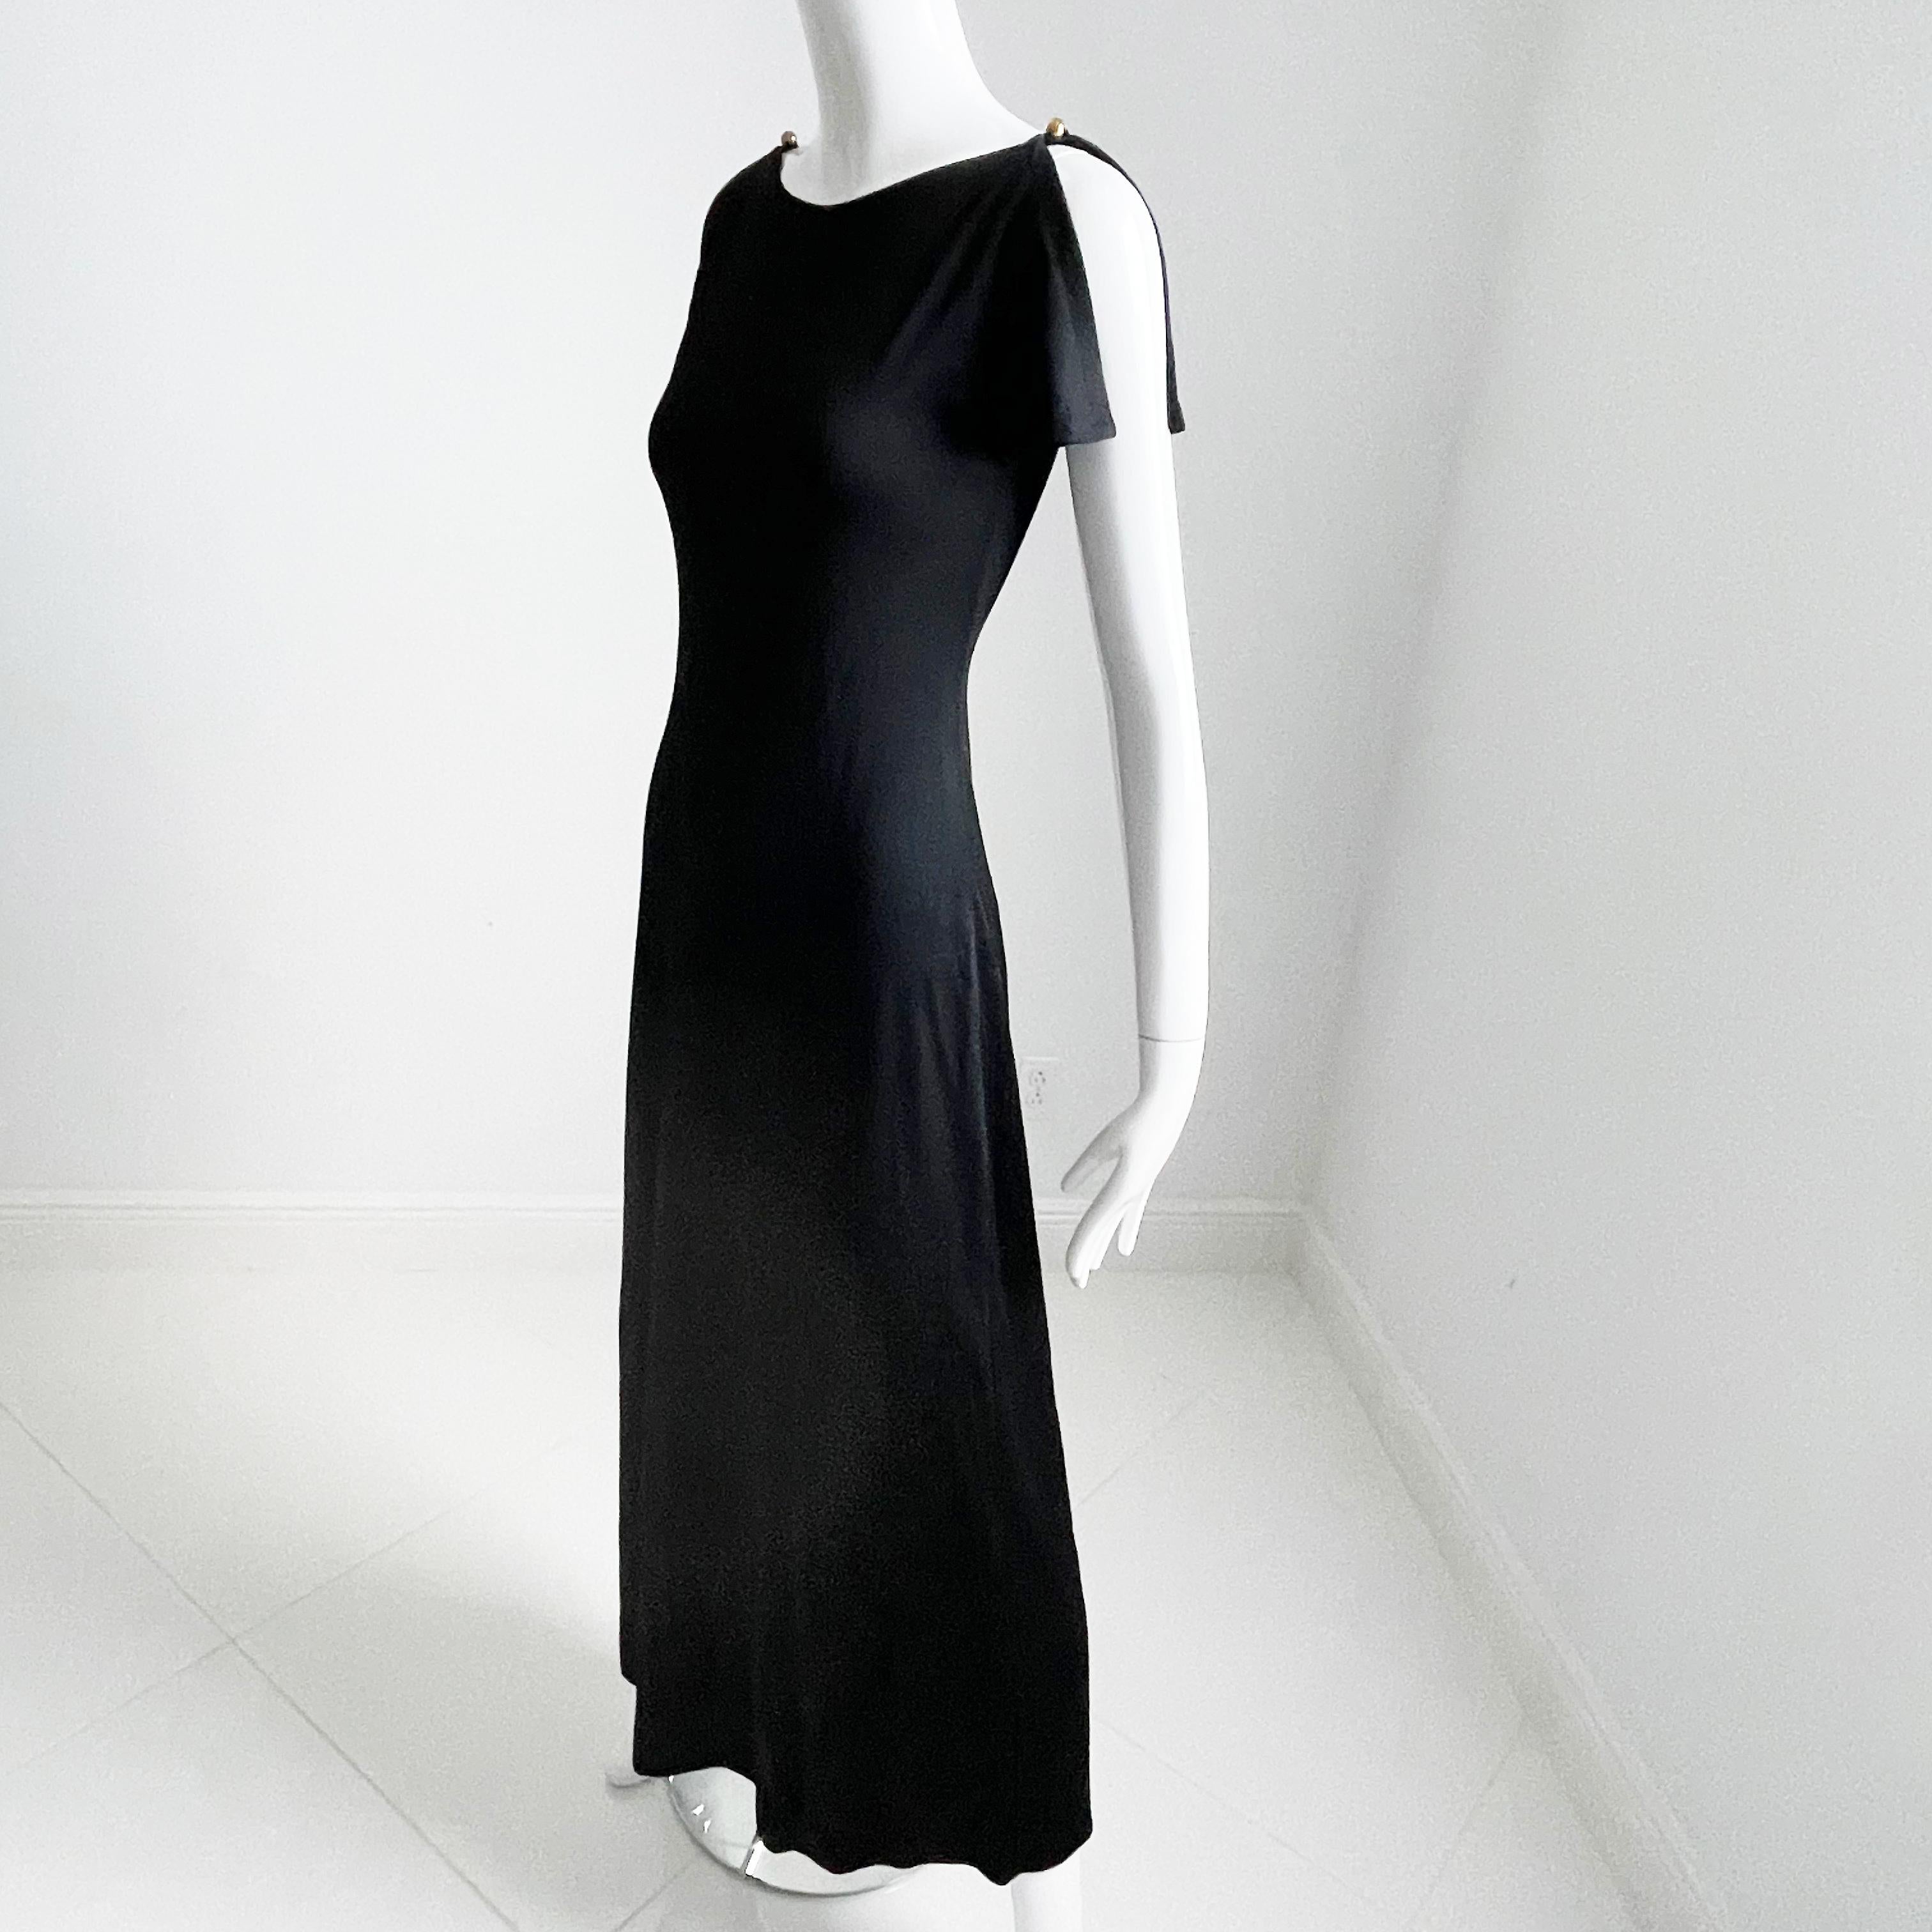 Clovis Ruffin Maxi Dress Black Jersey Flutter Sleeves Saks 5th Ave 1970s  For Sale 2